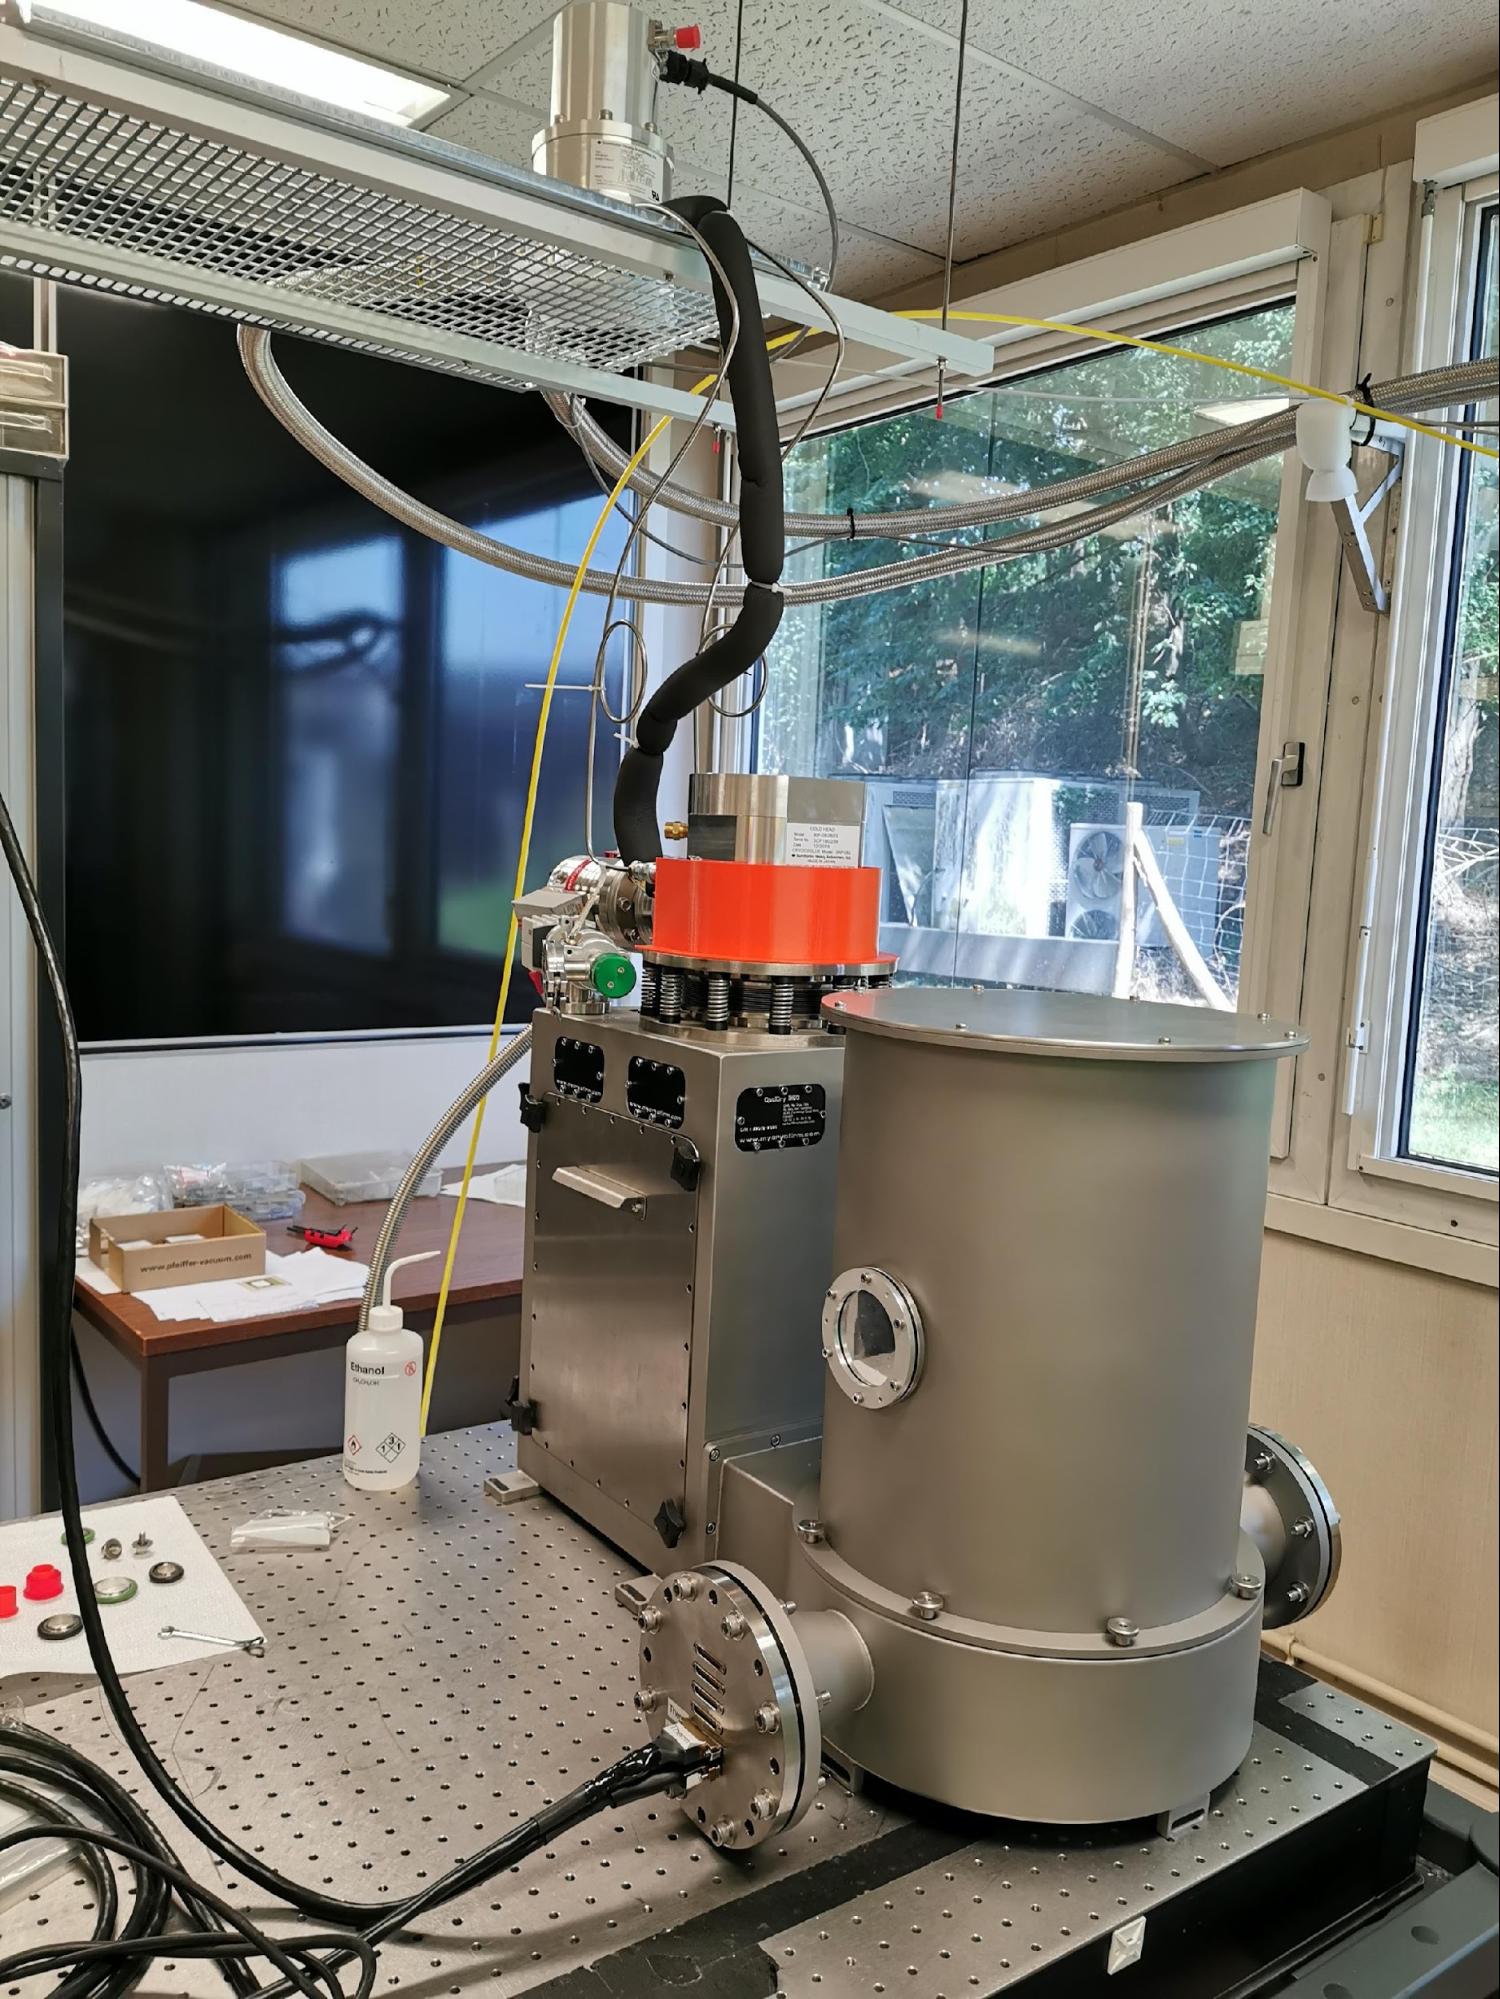 The Quantix cryostat in the infrared laboratory at the Astrophysics Department. The cylindrical part will receive the Quantix optical bench, and the parallelepiped part houses the cryogenic system. The optical bench will operate at a temperature of 20 K. © CEA